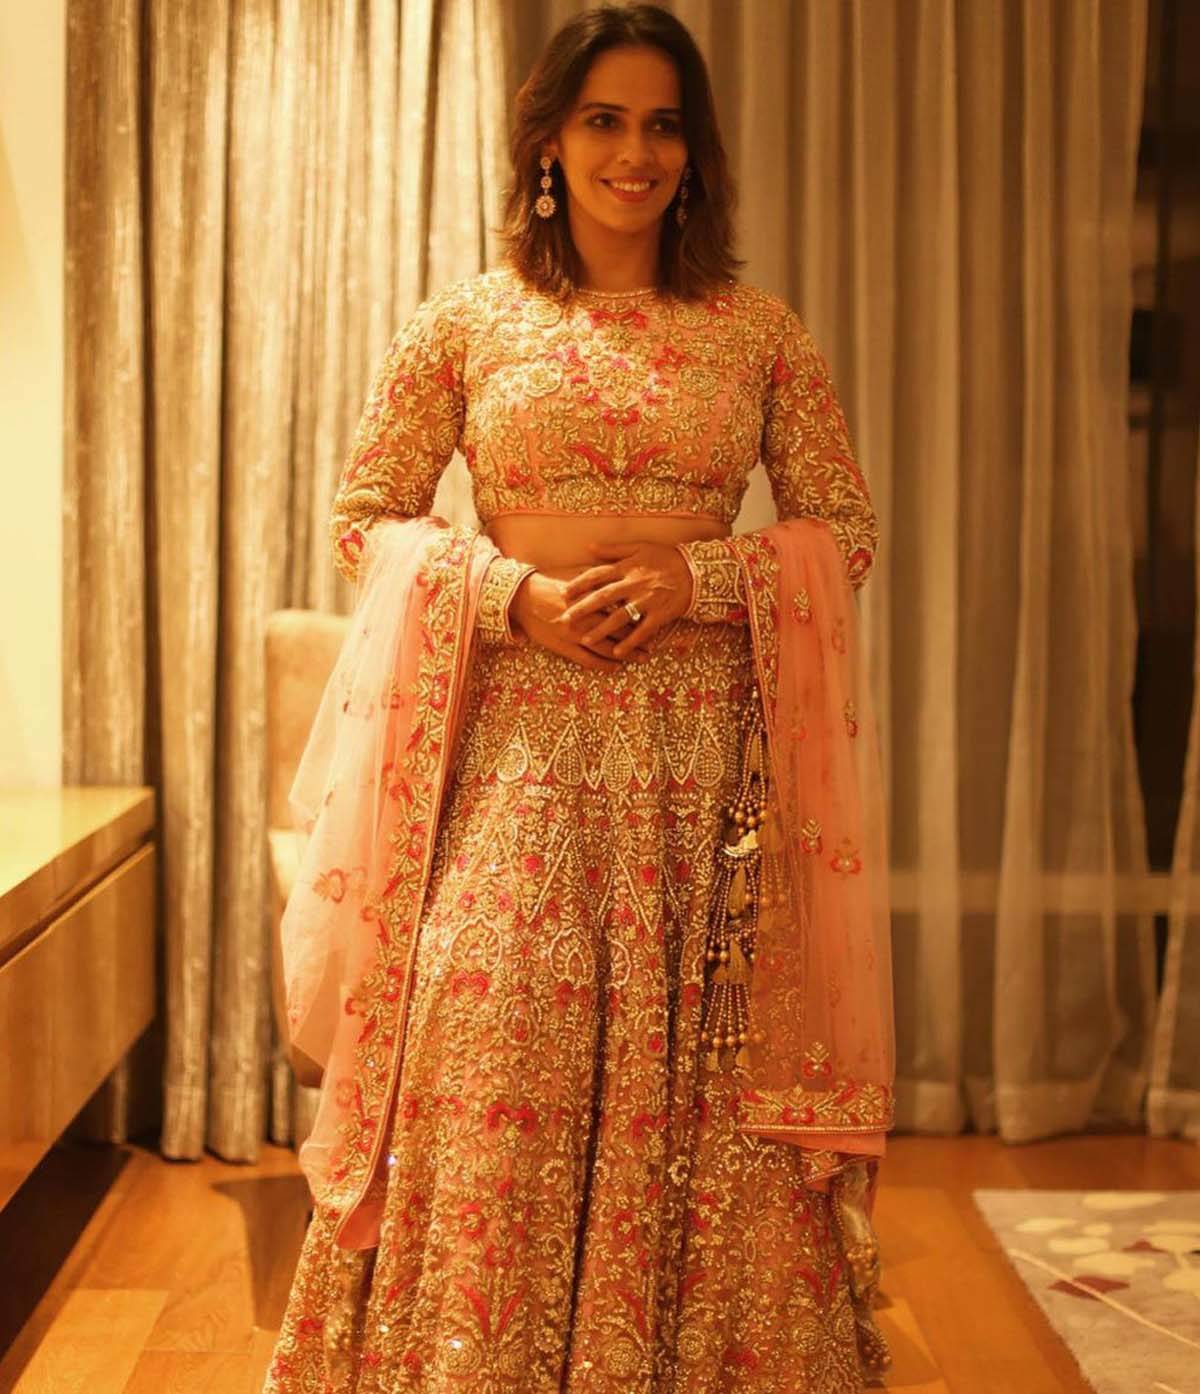 Badminton player Saina Nehwal is a style queen off the court